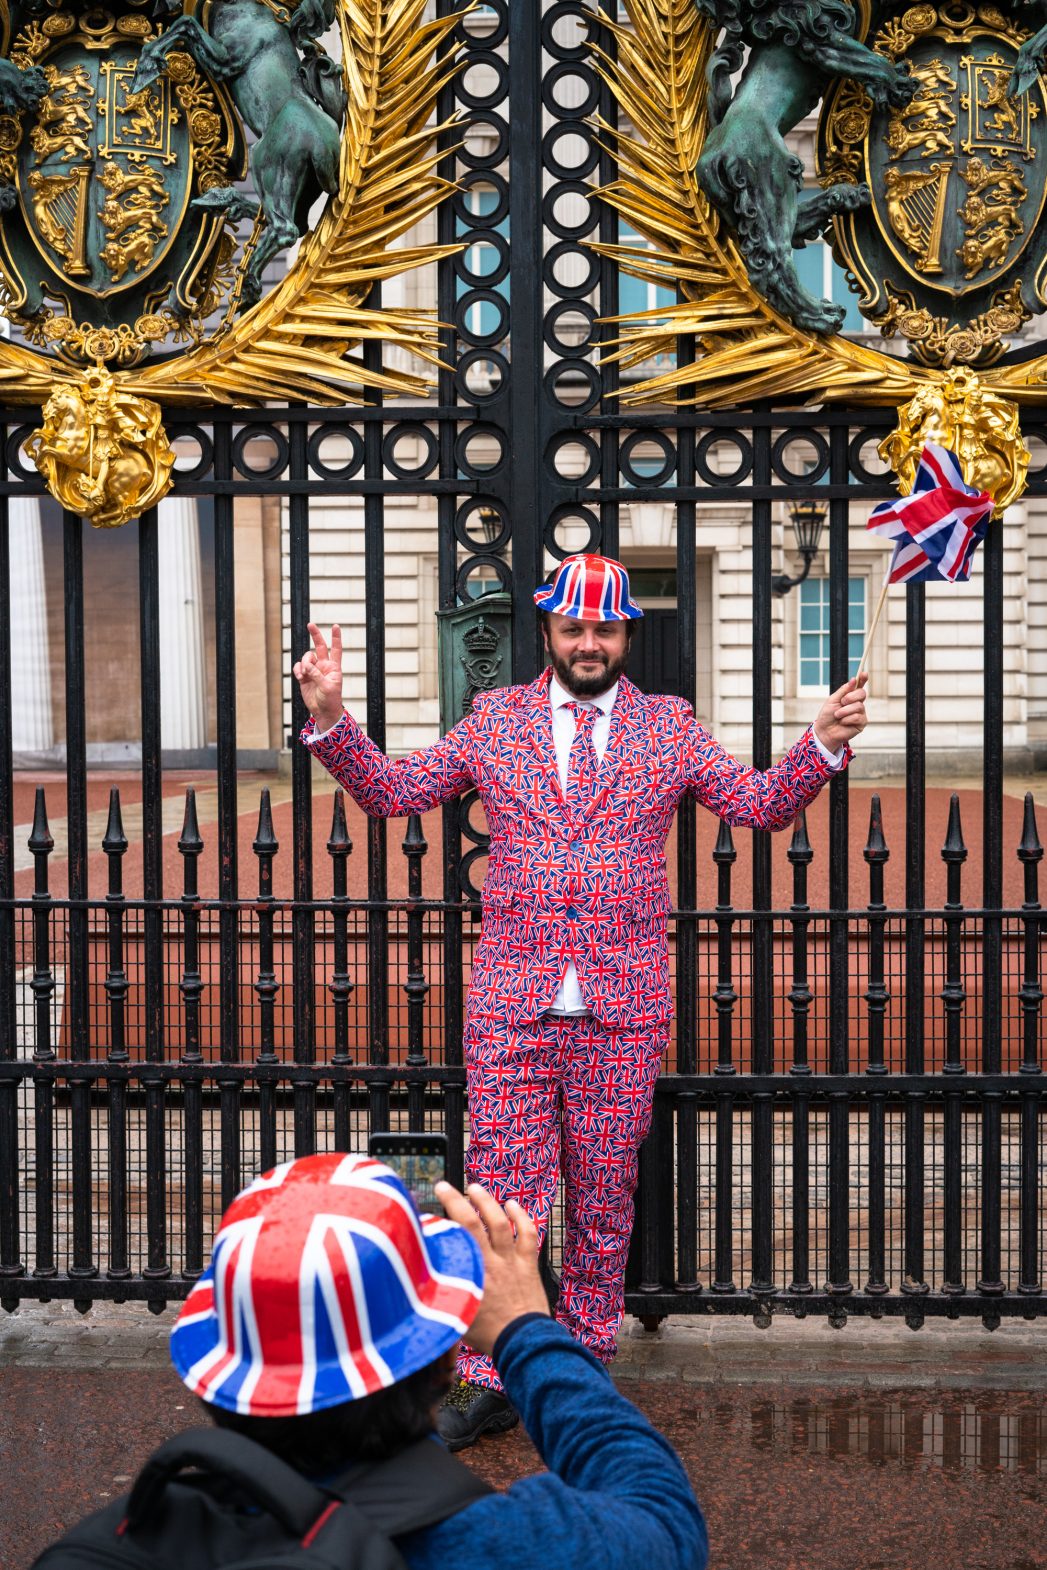 A man wearing a head-to-toe Union Jack suit, hat and umbrella photographed outside the gates of Buckingham Palace.